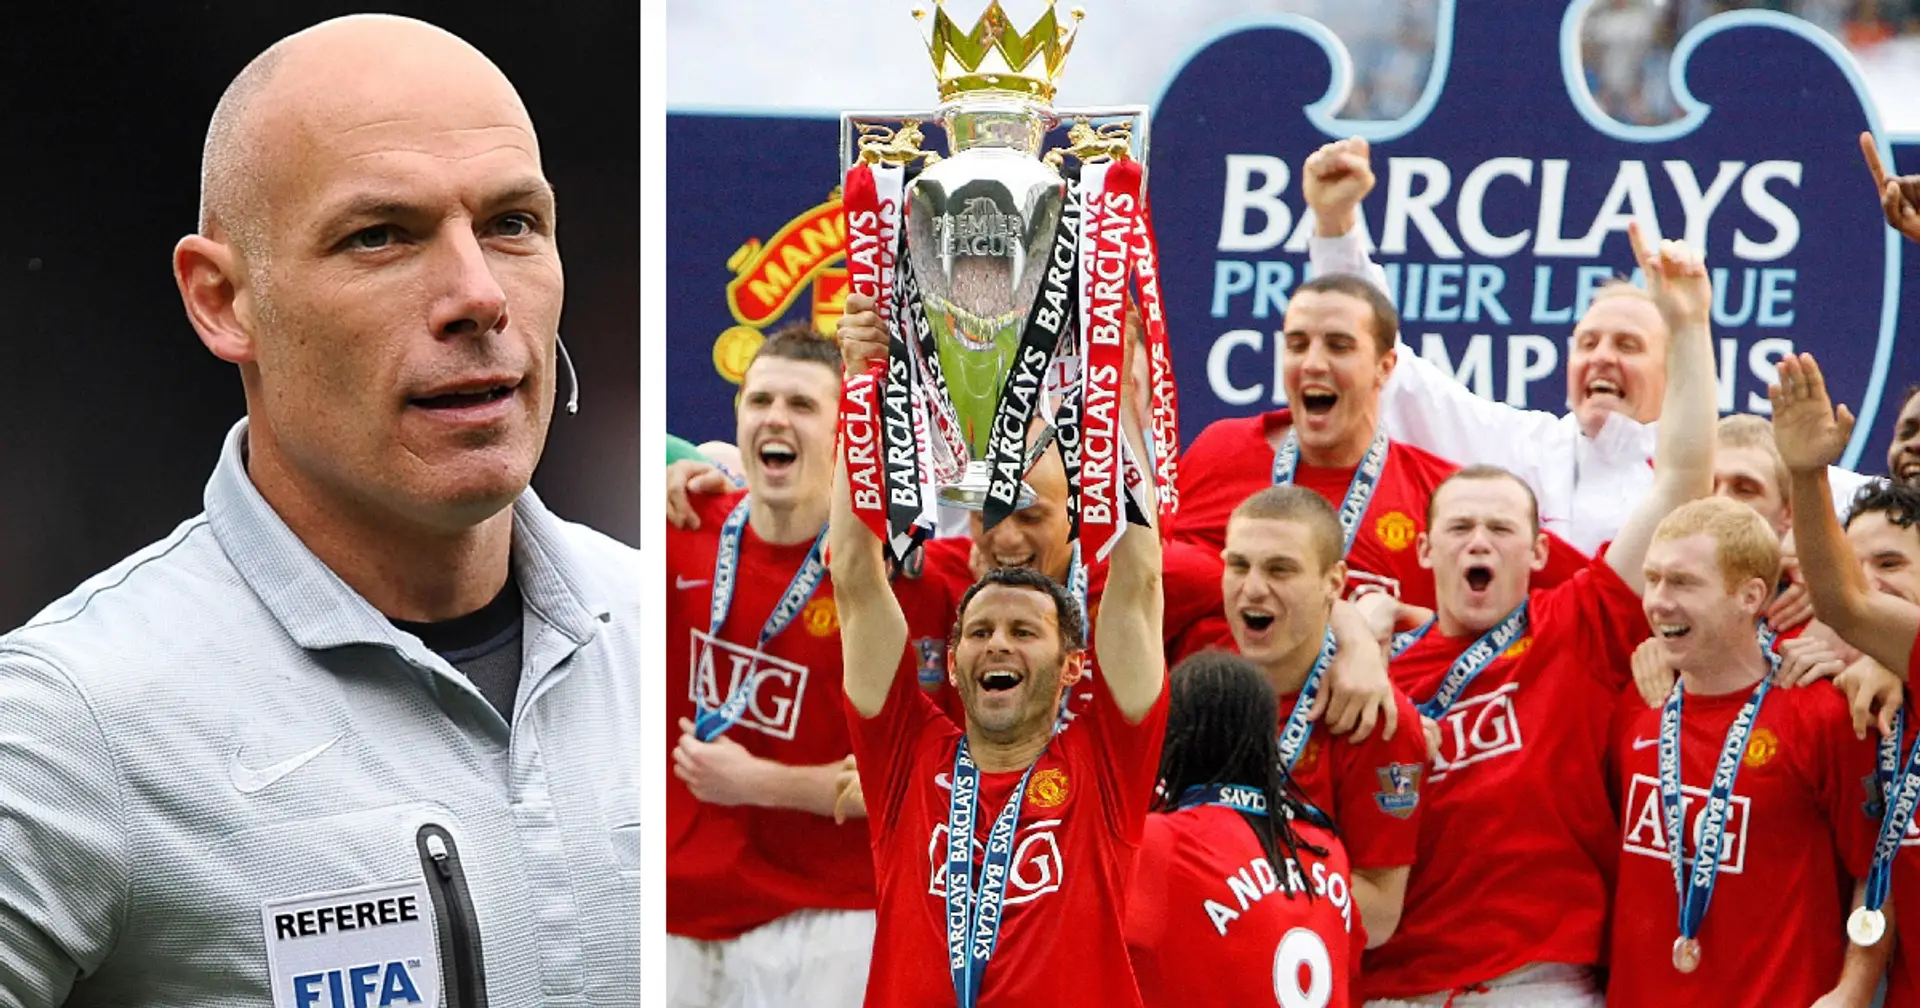 'I was hoping Ronaldo would miss': Howard Webb admits error in decision which helped United win title in 2009